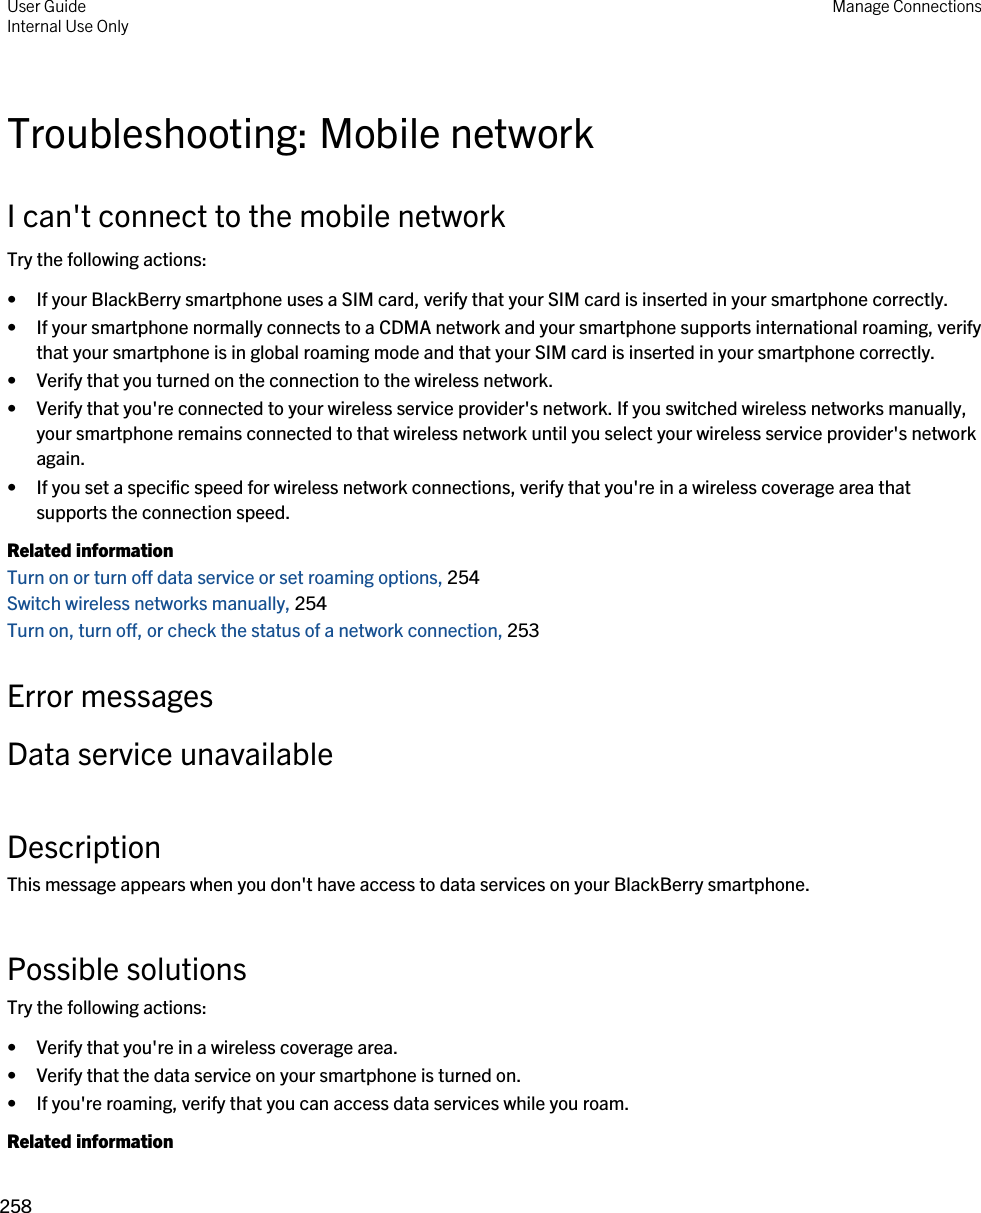 Troubleshooting: Mobile networkI can&apos;t connect to the mobile networkTry the following actions:• If your BlackBerry smartphone uses a SIM card, verify that your SIM card is inserted in your smartphone correctly.• If your smartphone normally connects to a CDMA network and your smartphone supports international roaming, verify that your smartphone is in global roaming mode and that your SIM card is inserted in your smartphone correctly.• Verify that you turned on the connection to the wireless network.• Verify that you&apos;re connected to your wireless service provider&apos;s network. If you switched wireless networks manually, your smartphone remains connected to that wireless network until you select your wireless service provider&apos;s network again.• If you set a specific speed for wireless network connections, verify that you&apos;re in a wireless coverage area that supports the connection speed.Related informationTurn on or turn off data service or set roaming options, 254 Switch wireless networks manually, 254 Turn on, turn off, or check the status of a network connection, 253 Error messagesData service unavailableDescriptionThis message appears when you don&apos;t have access to data services on your BlackBerry smartphone.Possible solutionsTry the following actions:• Verify that you&apos;re in a wireless coverage area.• Verify that the data service on your smartphone is turned on.• If you&apos;re roaming, verify that you can access data services while you roam.Related informationUser GuideInternal Use Only Manage Connections258 